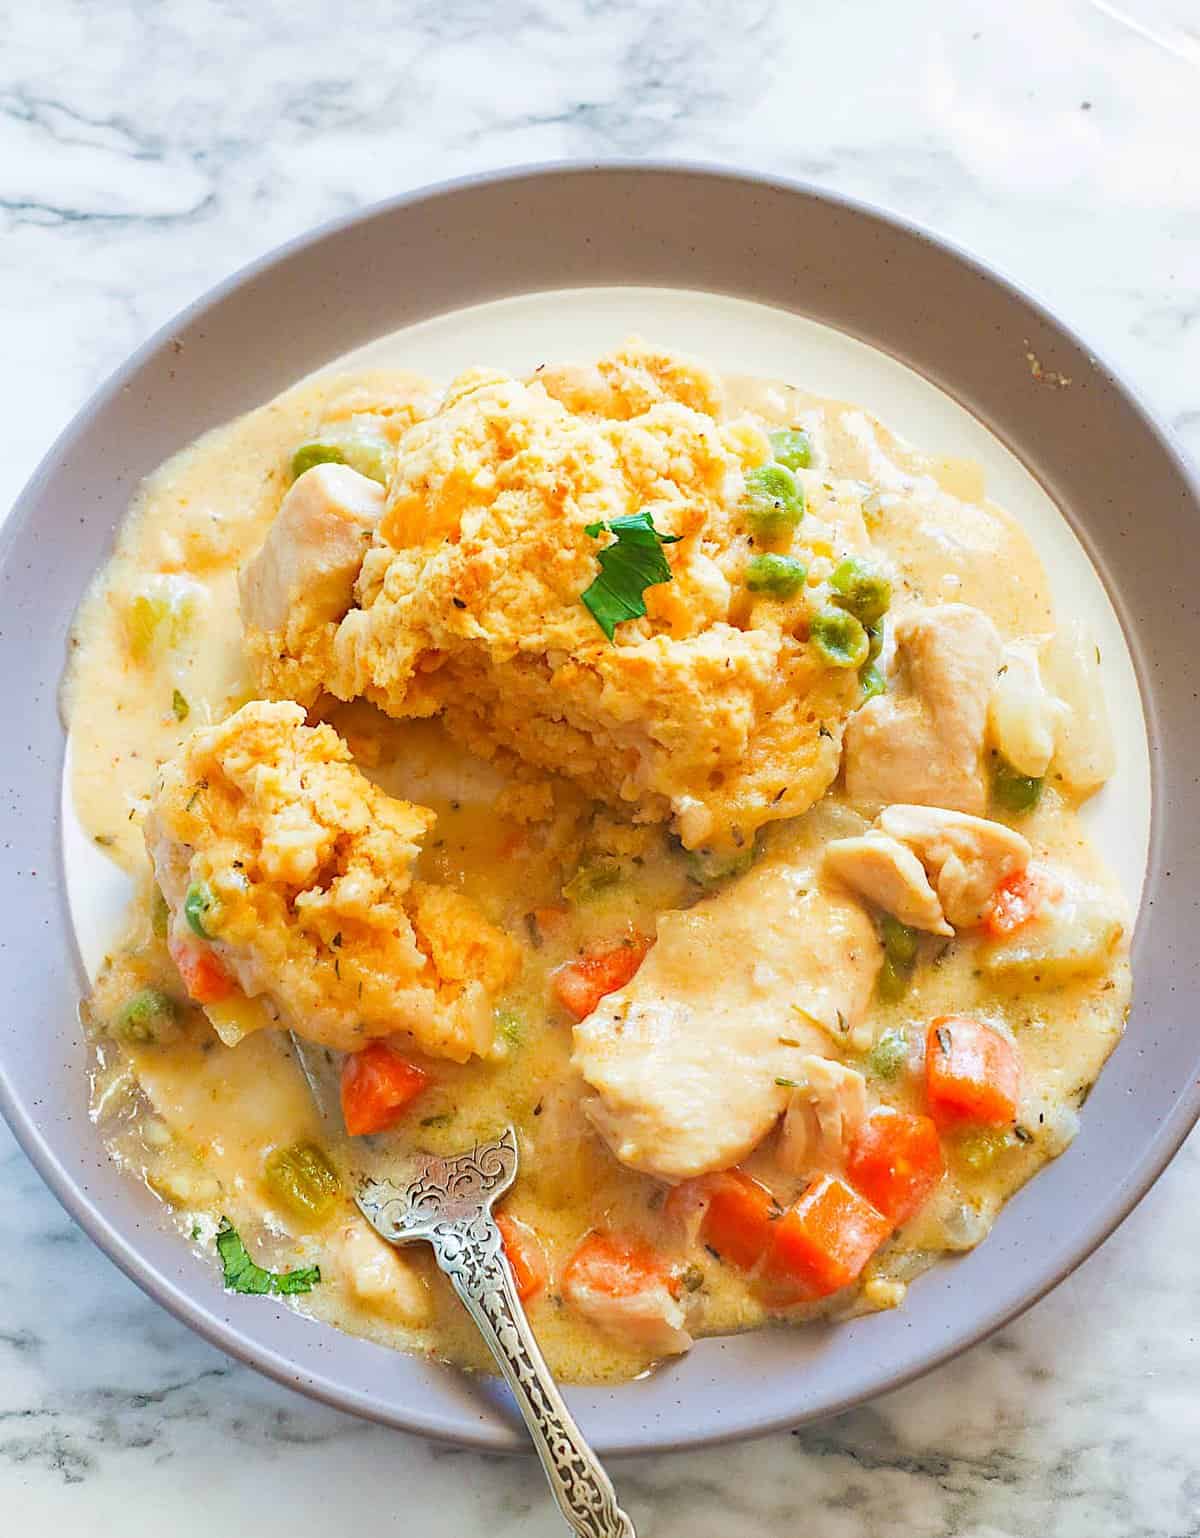 Enjoying a bowl of Creamy Chicken and Biscuits